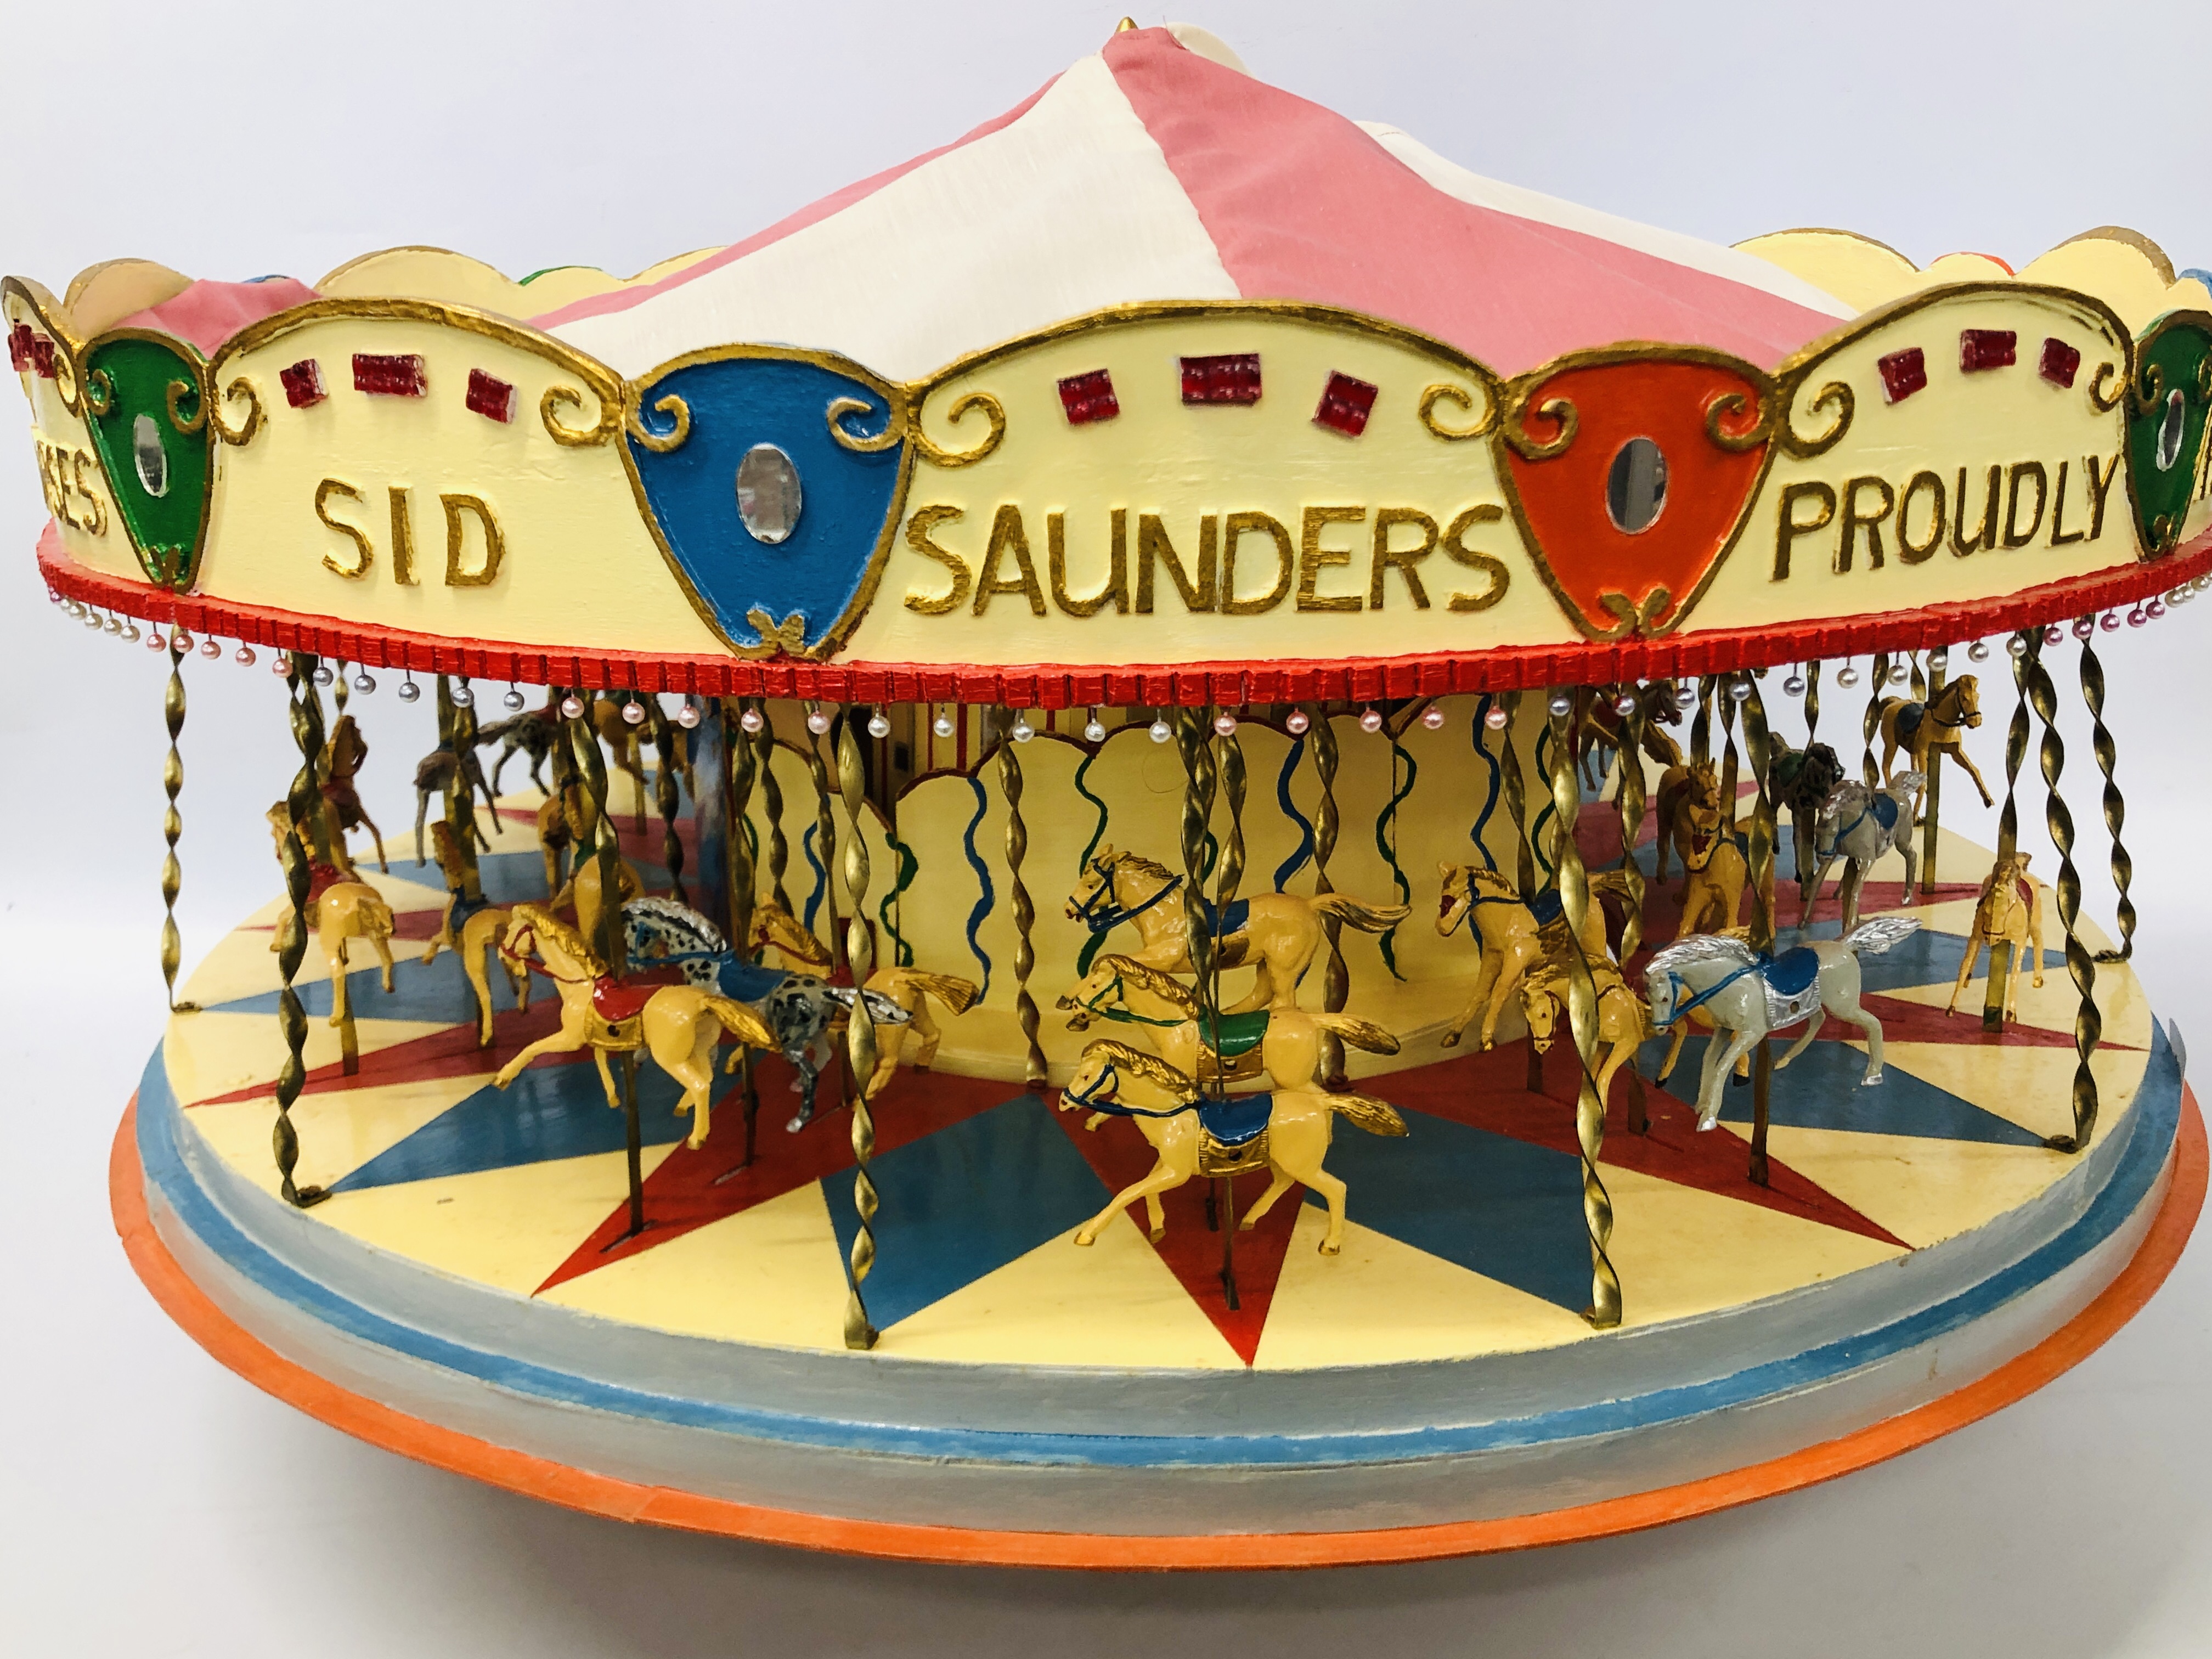 A VINTAGE HANDCRAFTED WOODEN MODEL OF A FAIRGROUND CAROUSEL WITH MOTORISED ACTION AND LIGHTS - - Image 6 of 10